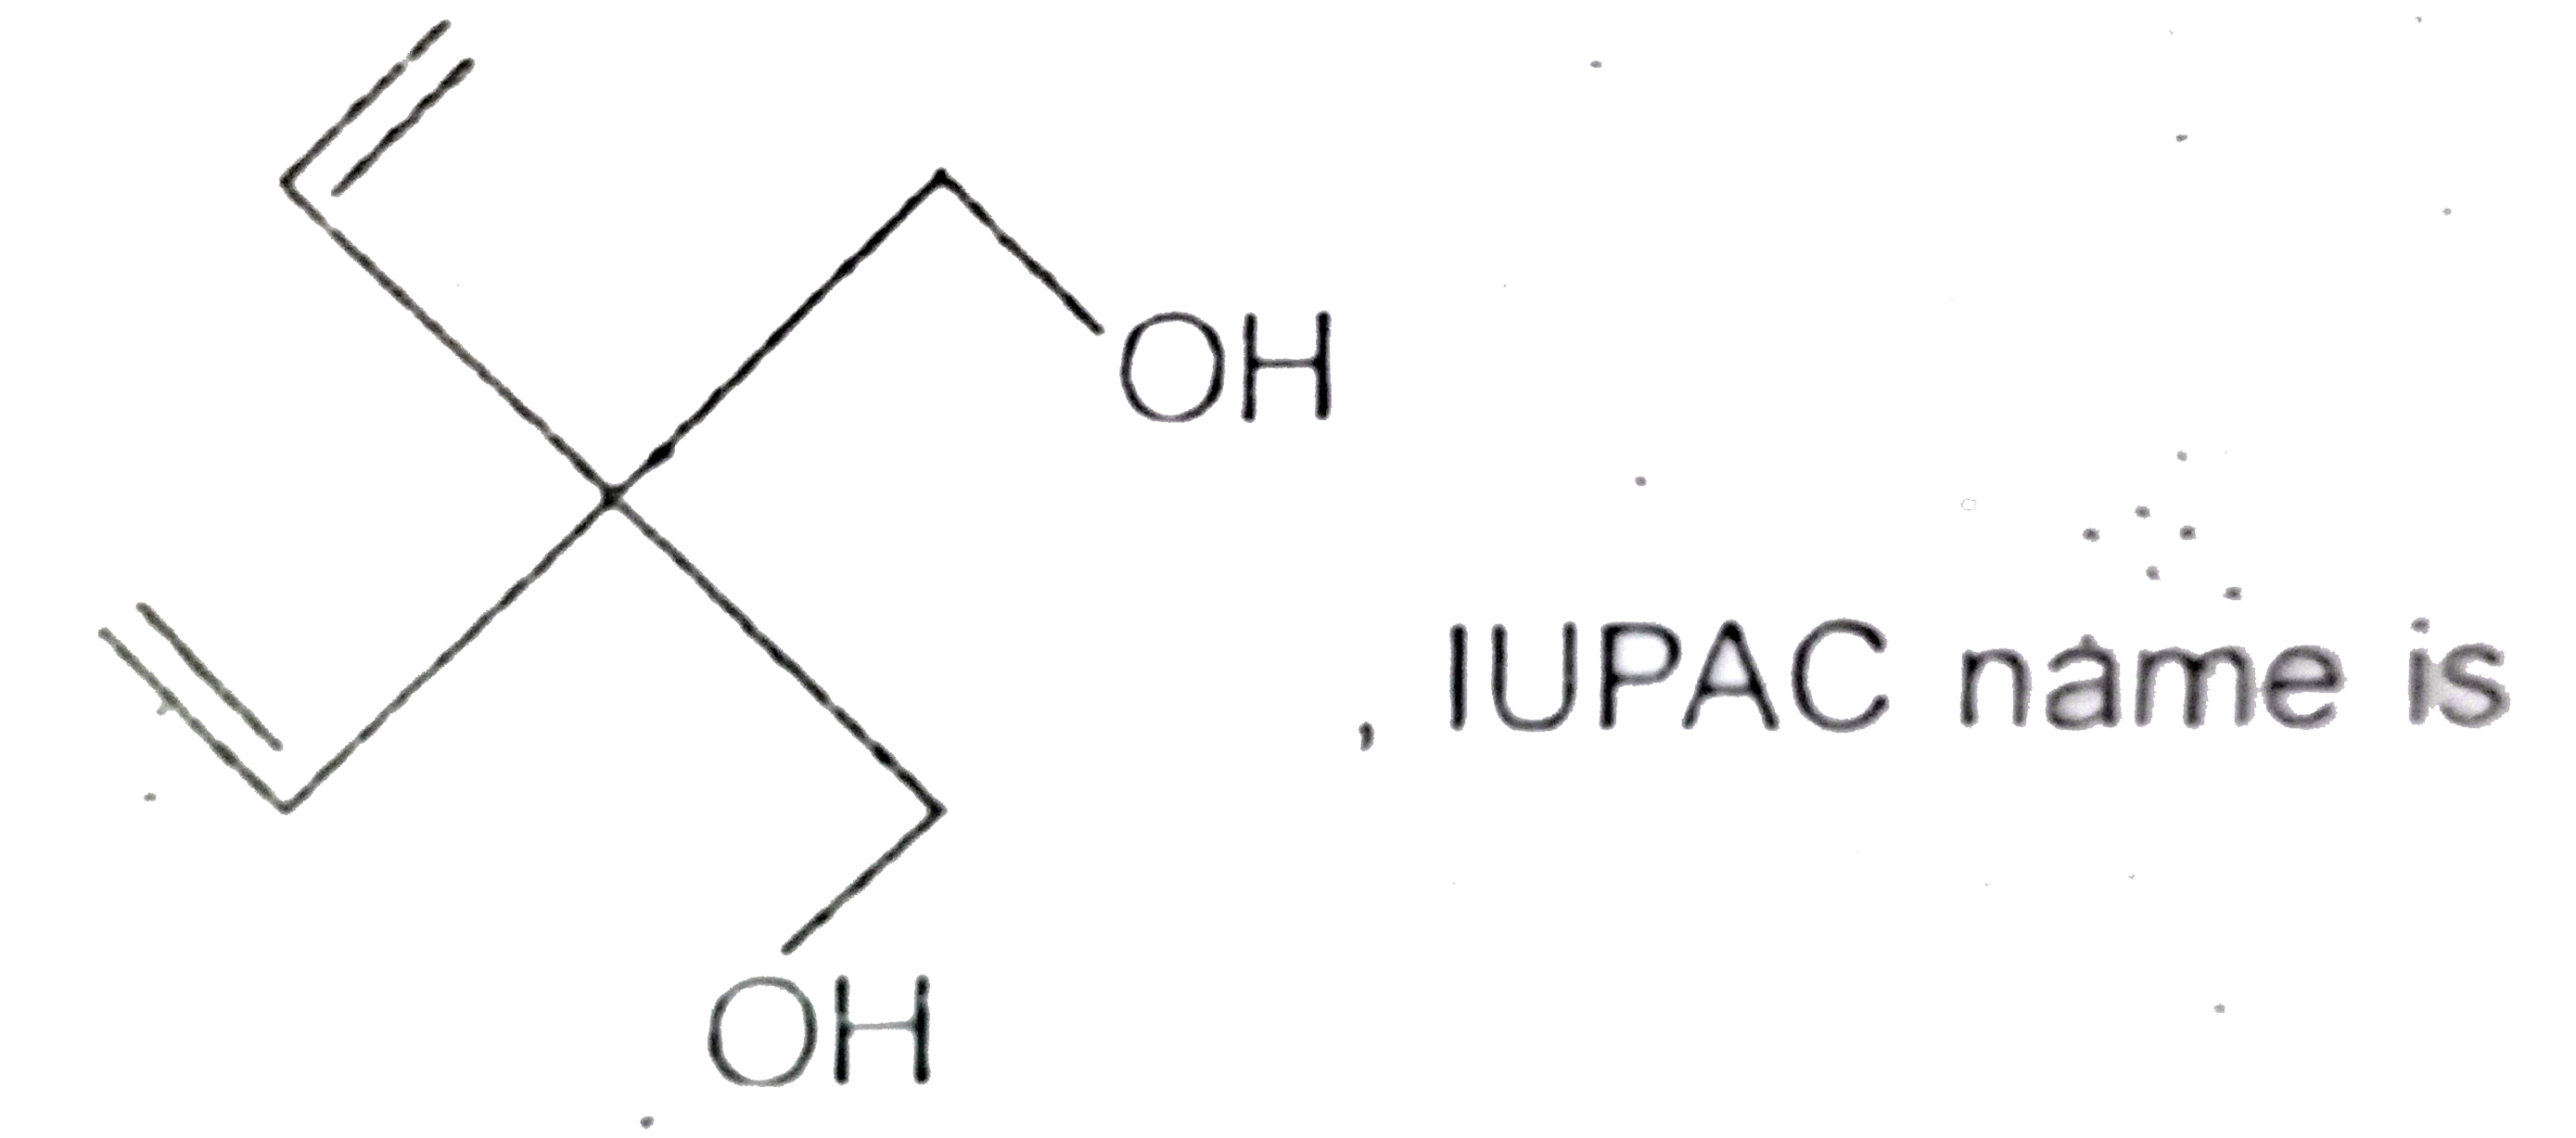 Names of organic compounds are under the latest guide line of IUPAC IUPAC means international union of pure and applied chemistry. The main rules are longest chain rule, lowest number rule etc. We have to include the rules for naming the substituetns, multiple bonds and even functional groups.